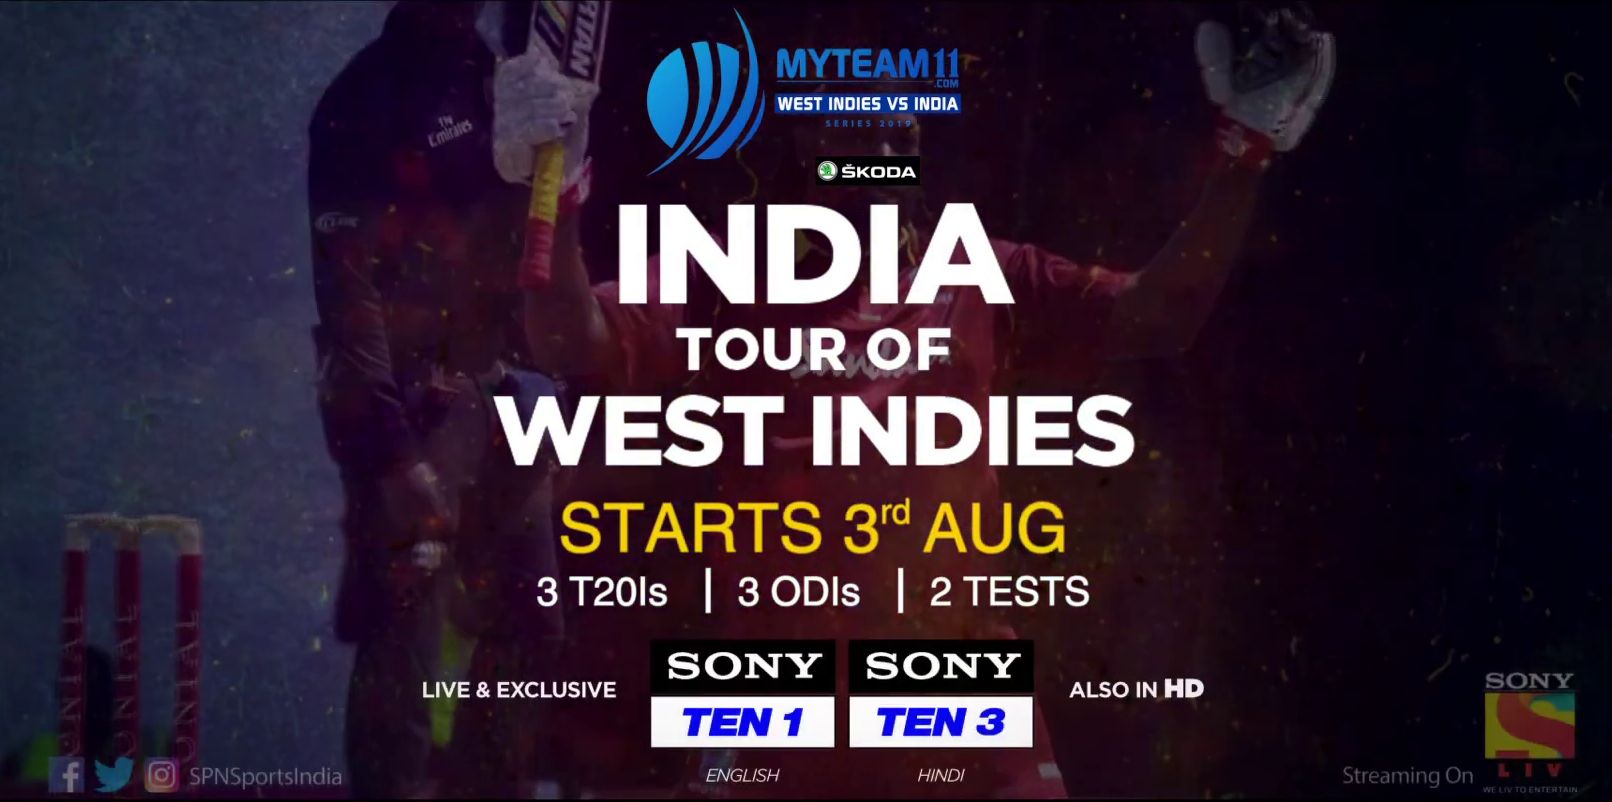 Hotstar Cricket Live Streaming - India Vs New Zealand 2017 One Day Matches